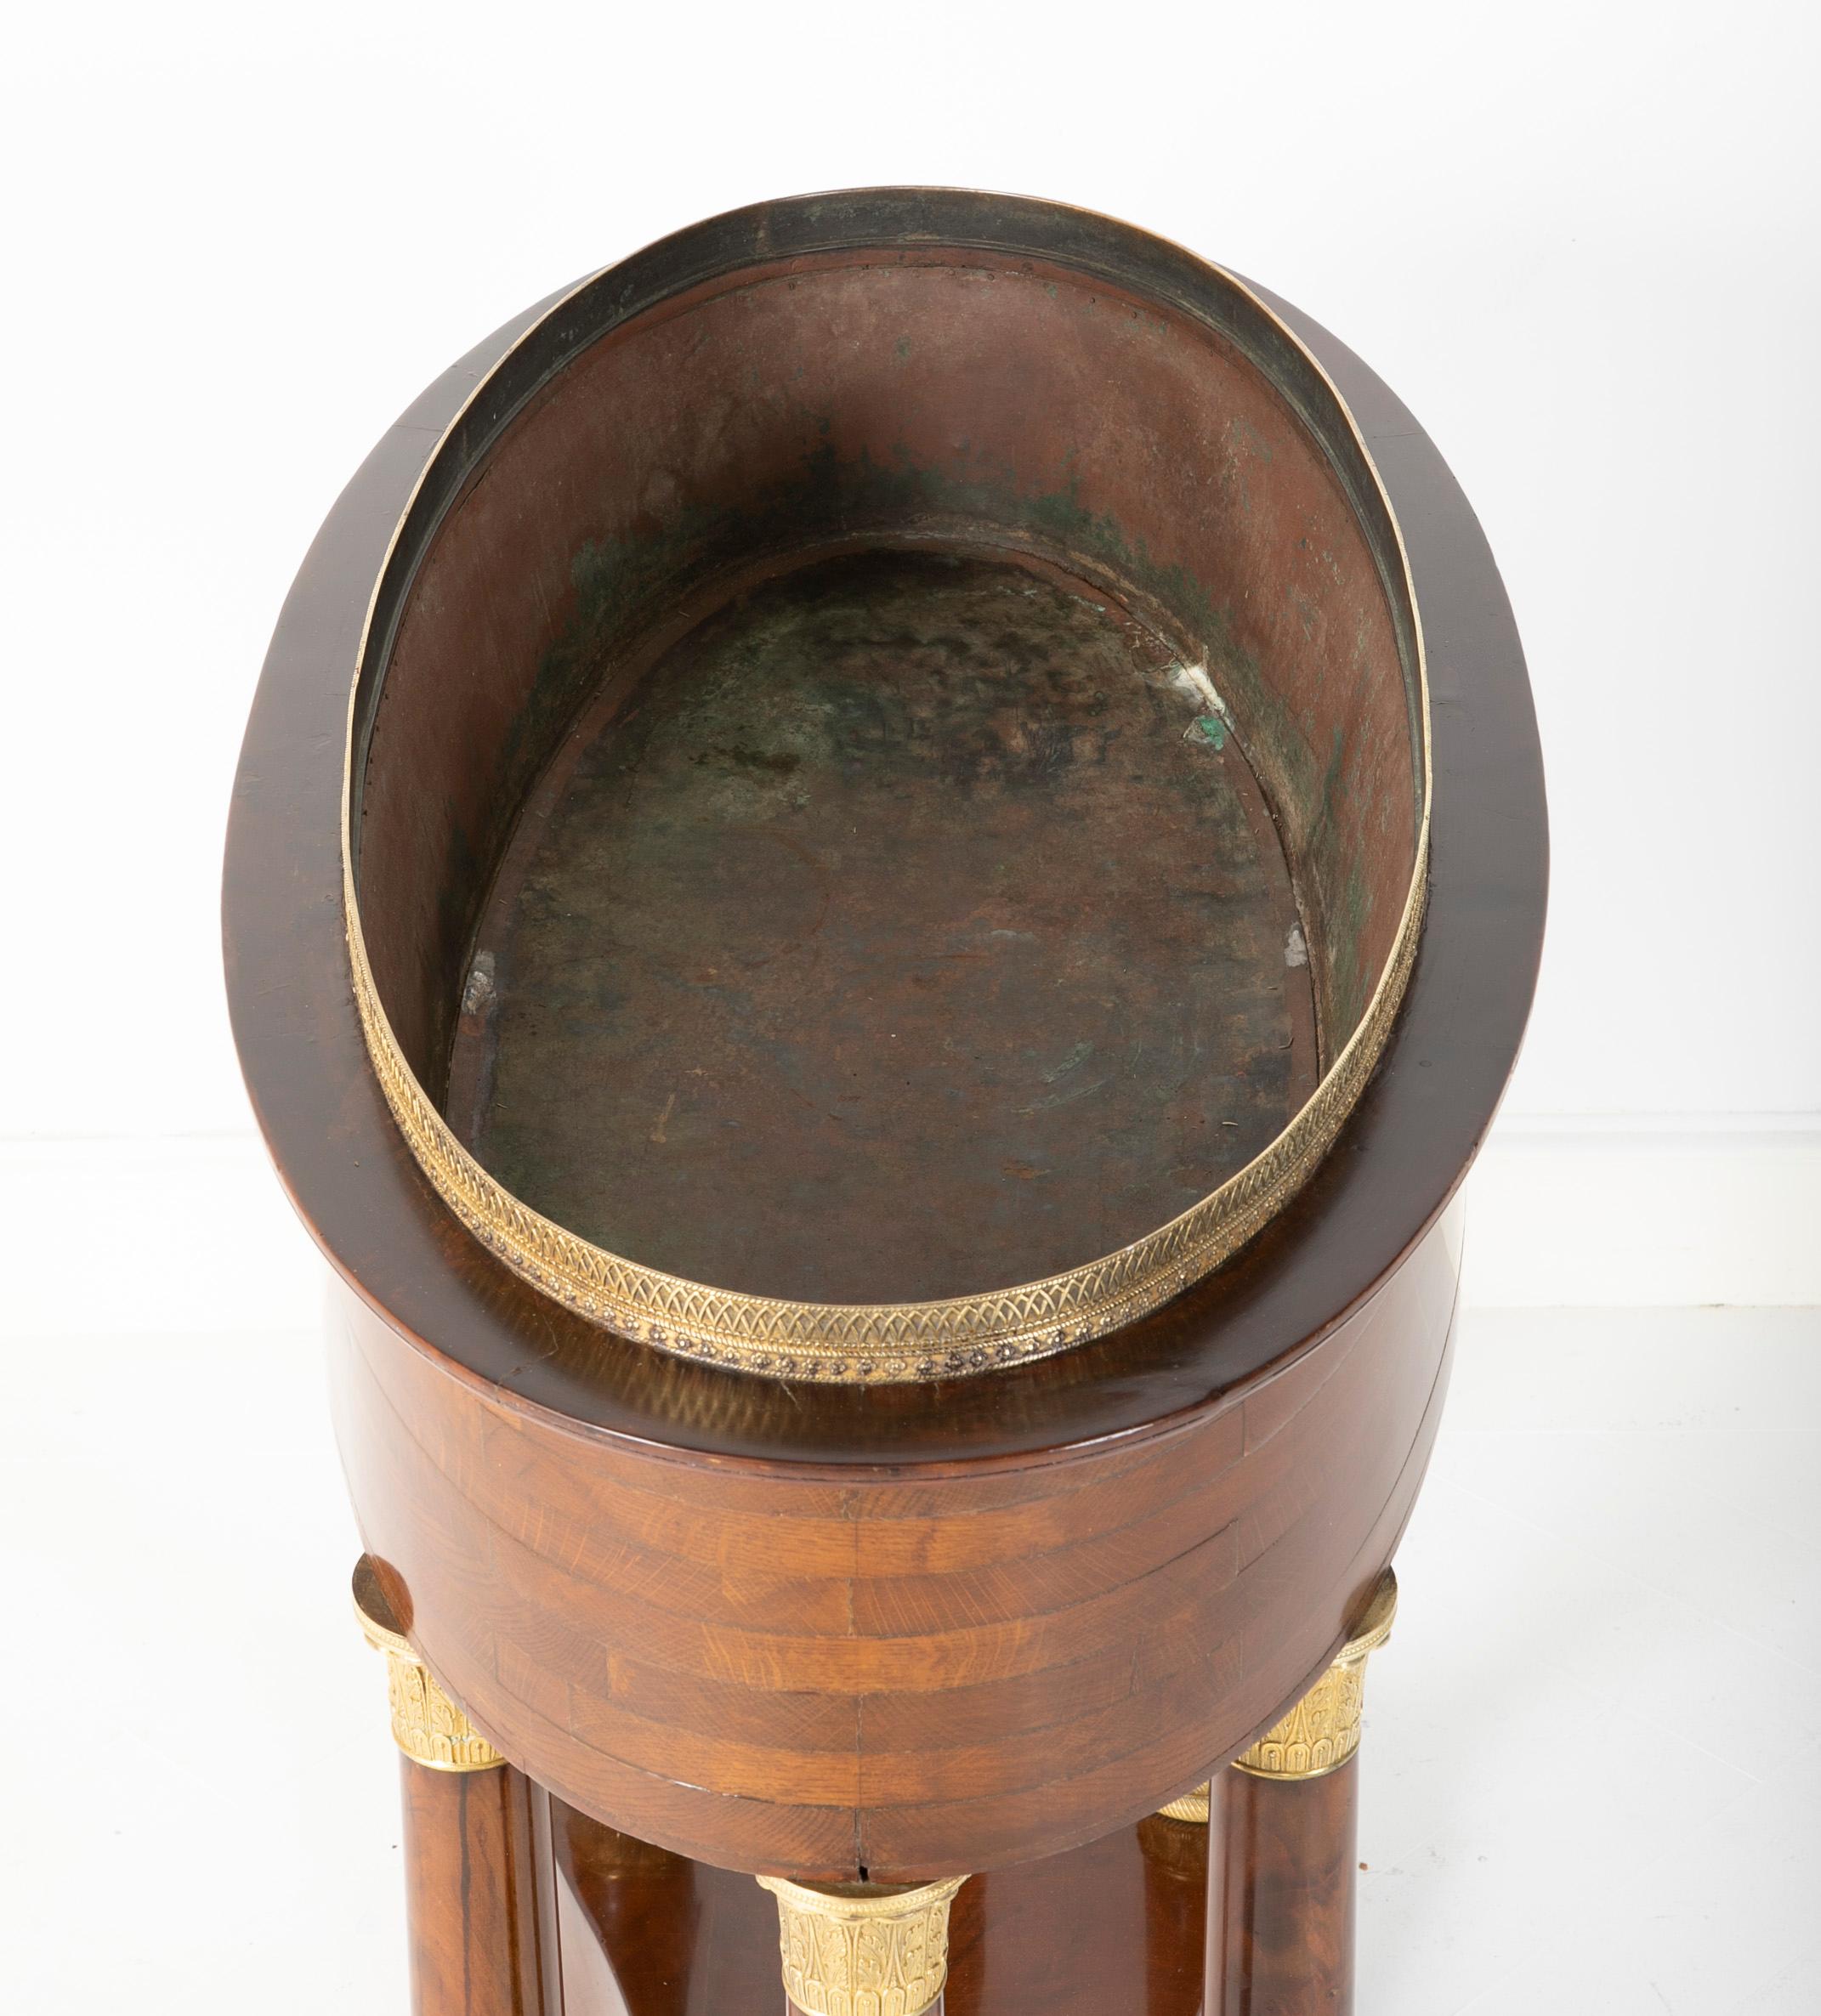 Gilt bronze mounted Empire style mahogany jardinière with metal liner, late 19th century.